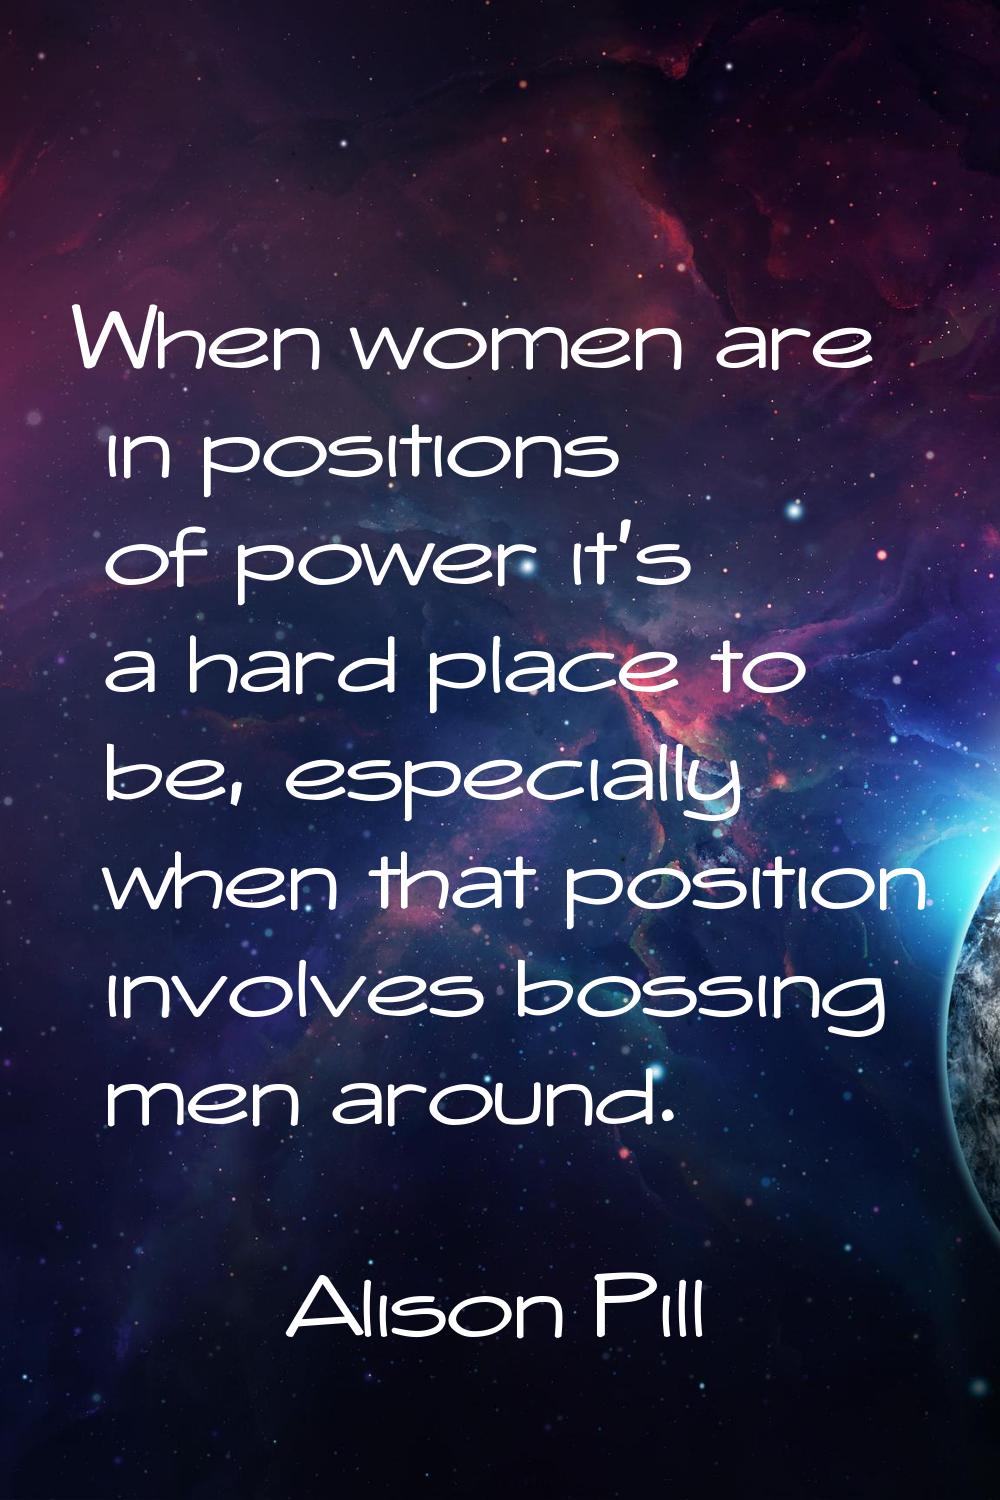 When women are in positions of power it's a hard place to be, especially when that position involve